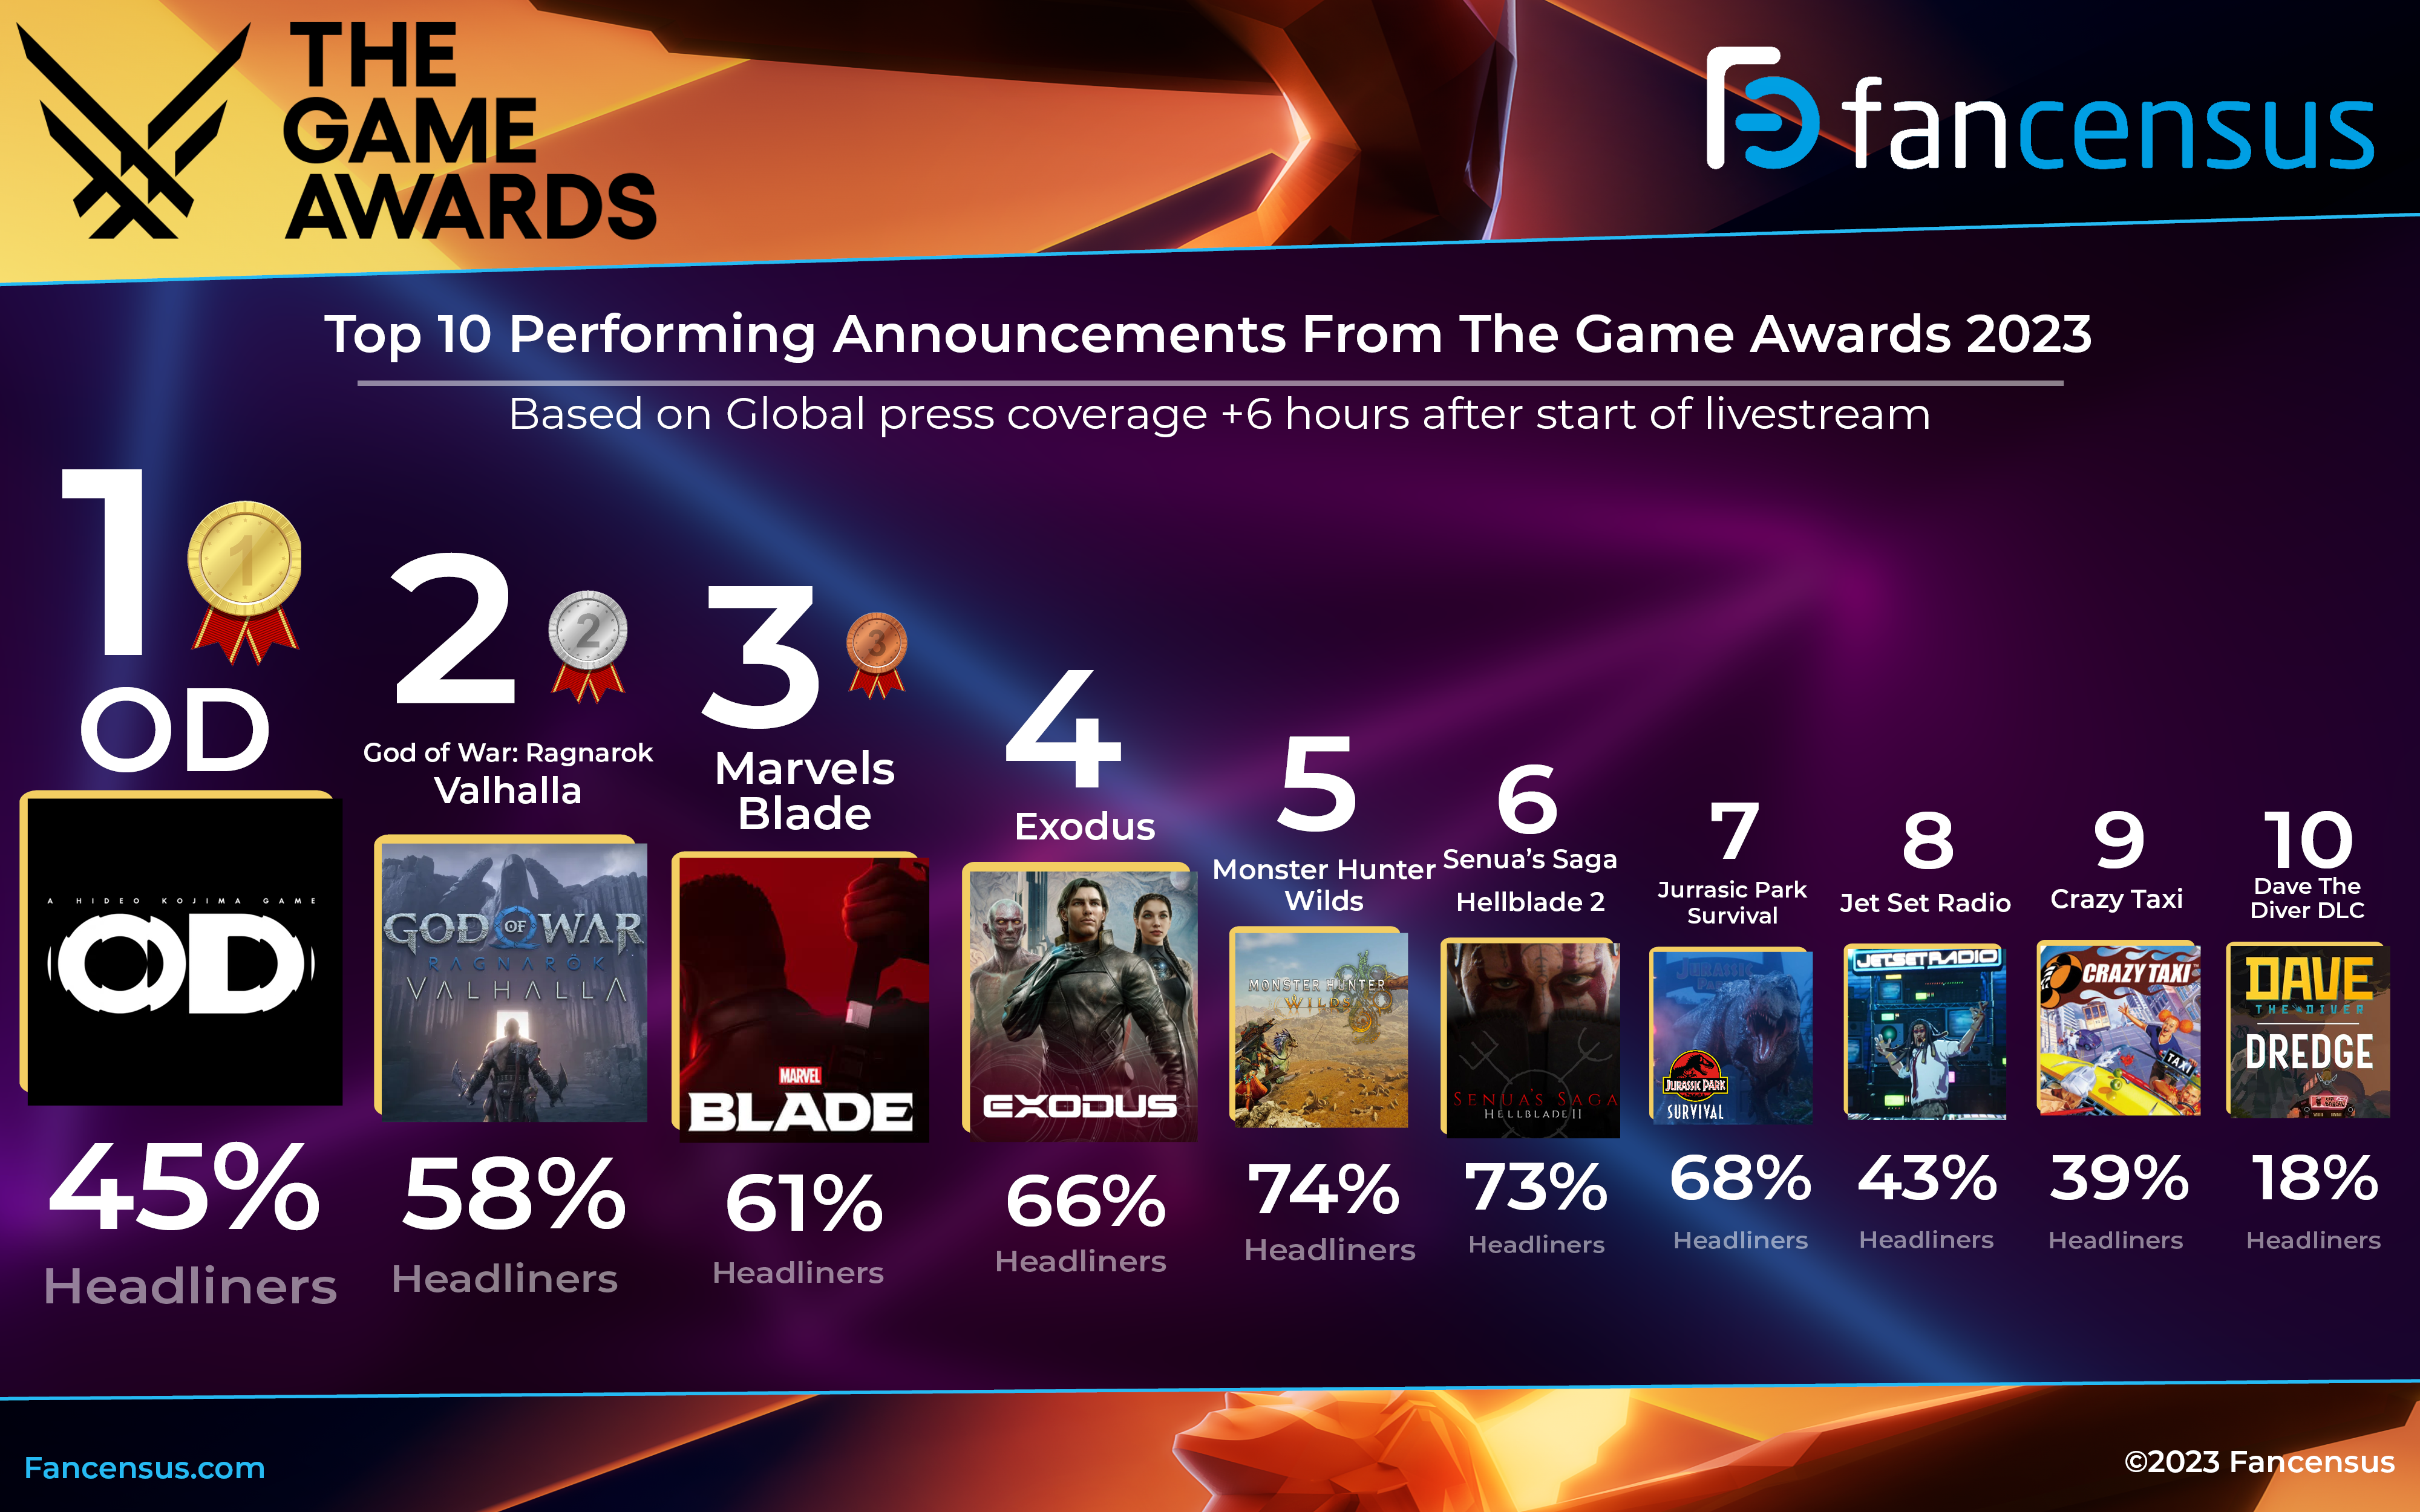 Top 10 Performing Announcements From The Game Awards 2023